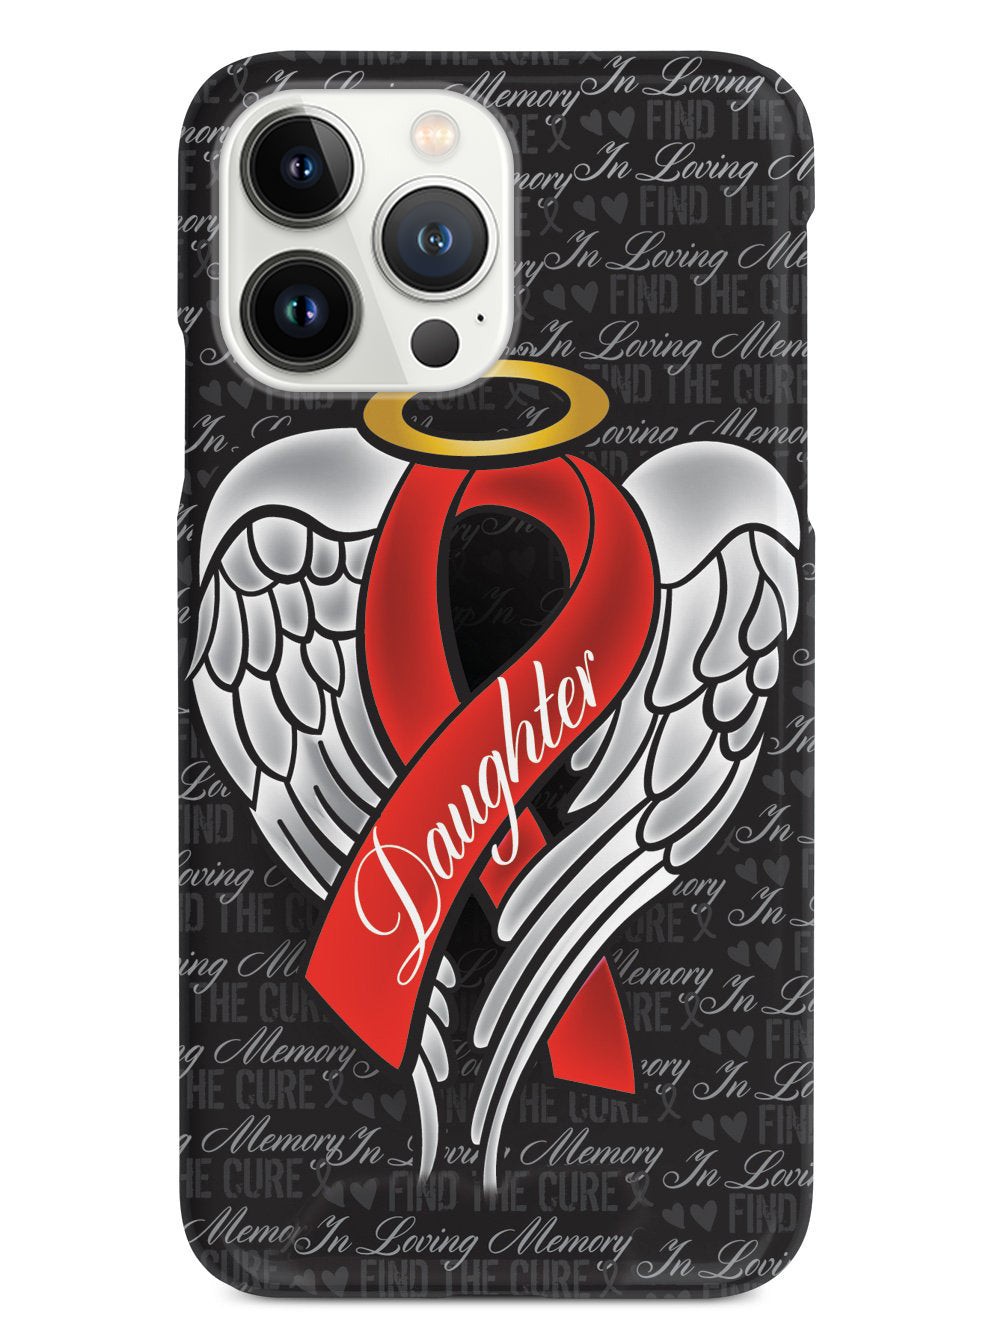 In Loving Memory of My Daughter - Red Ribbon Case